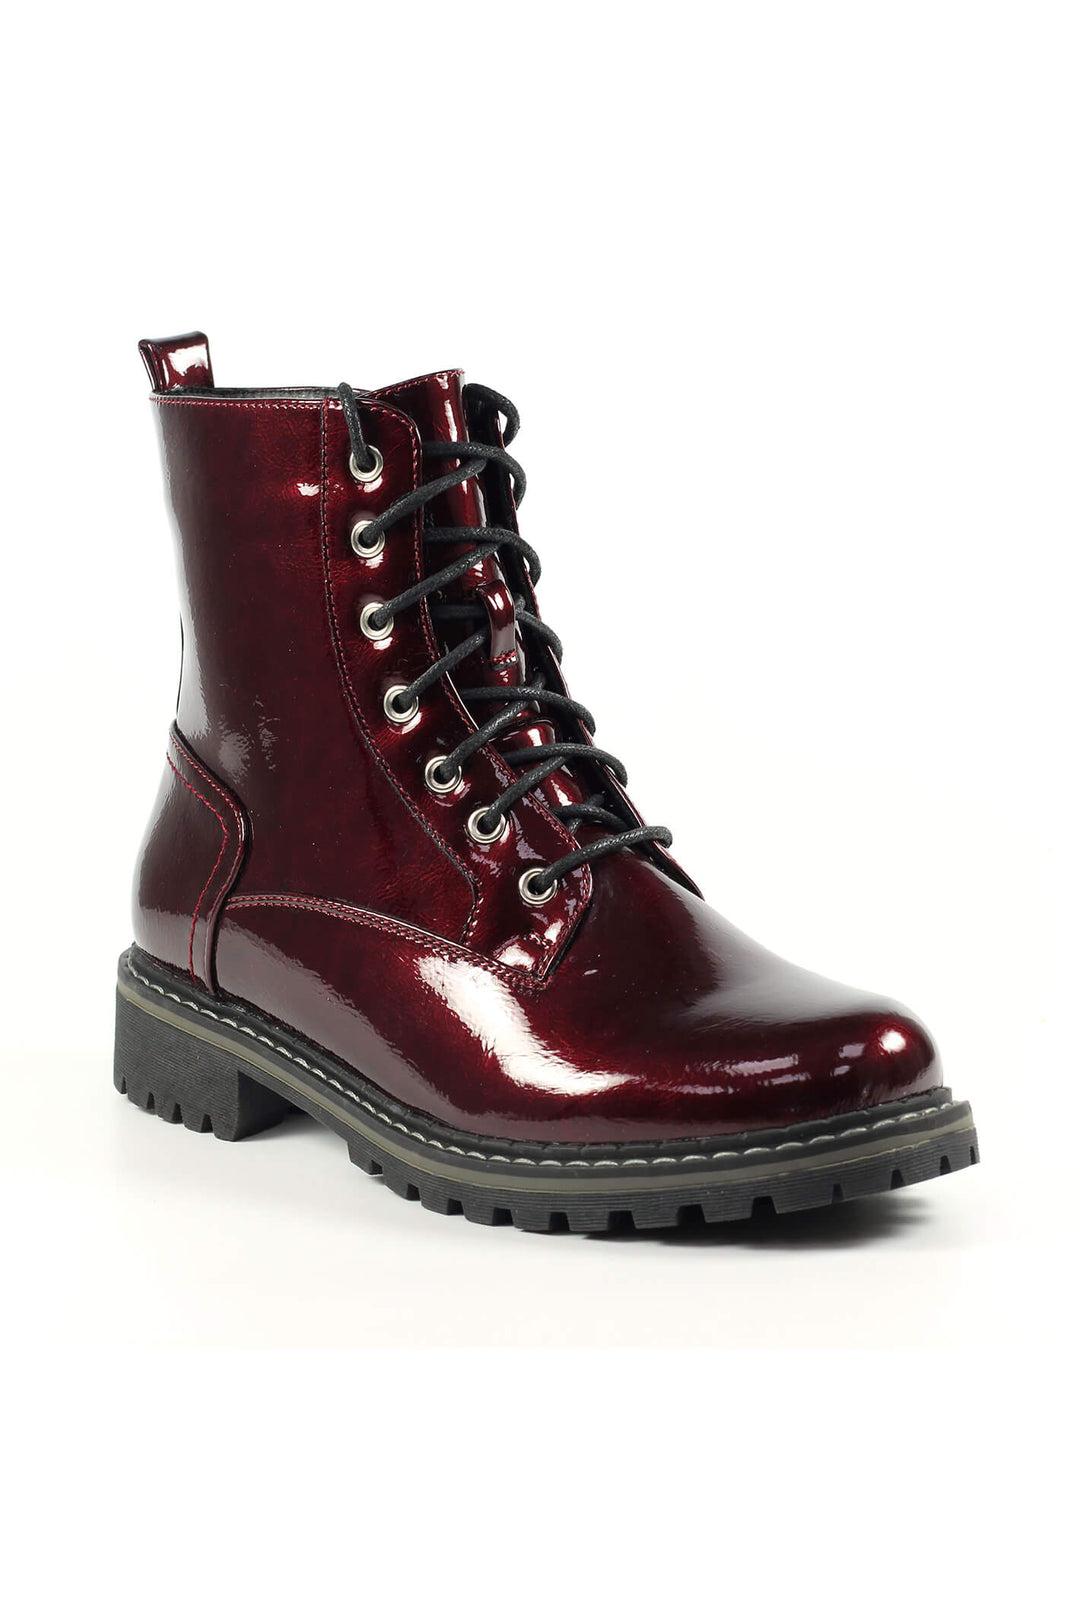 Lunar GLW011 Nala Burgundy Red Patent Boots - Experience Boutique